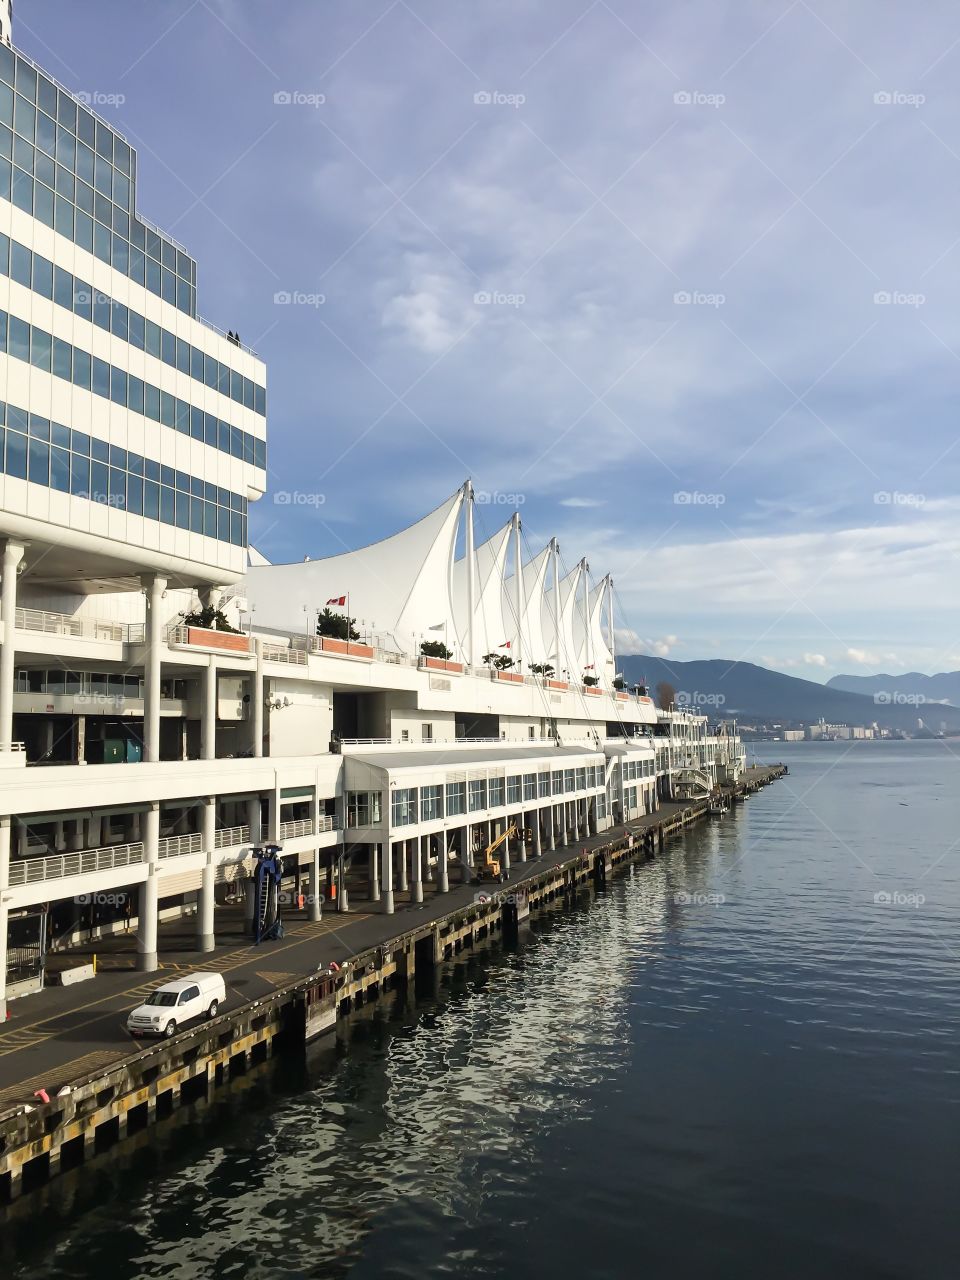 Canada place Sails at Pan Pacific Hotel in Vancouver, British Columbia 